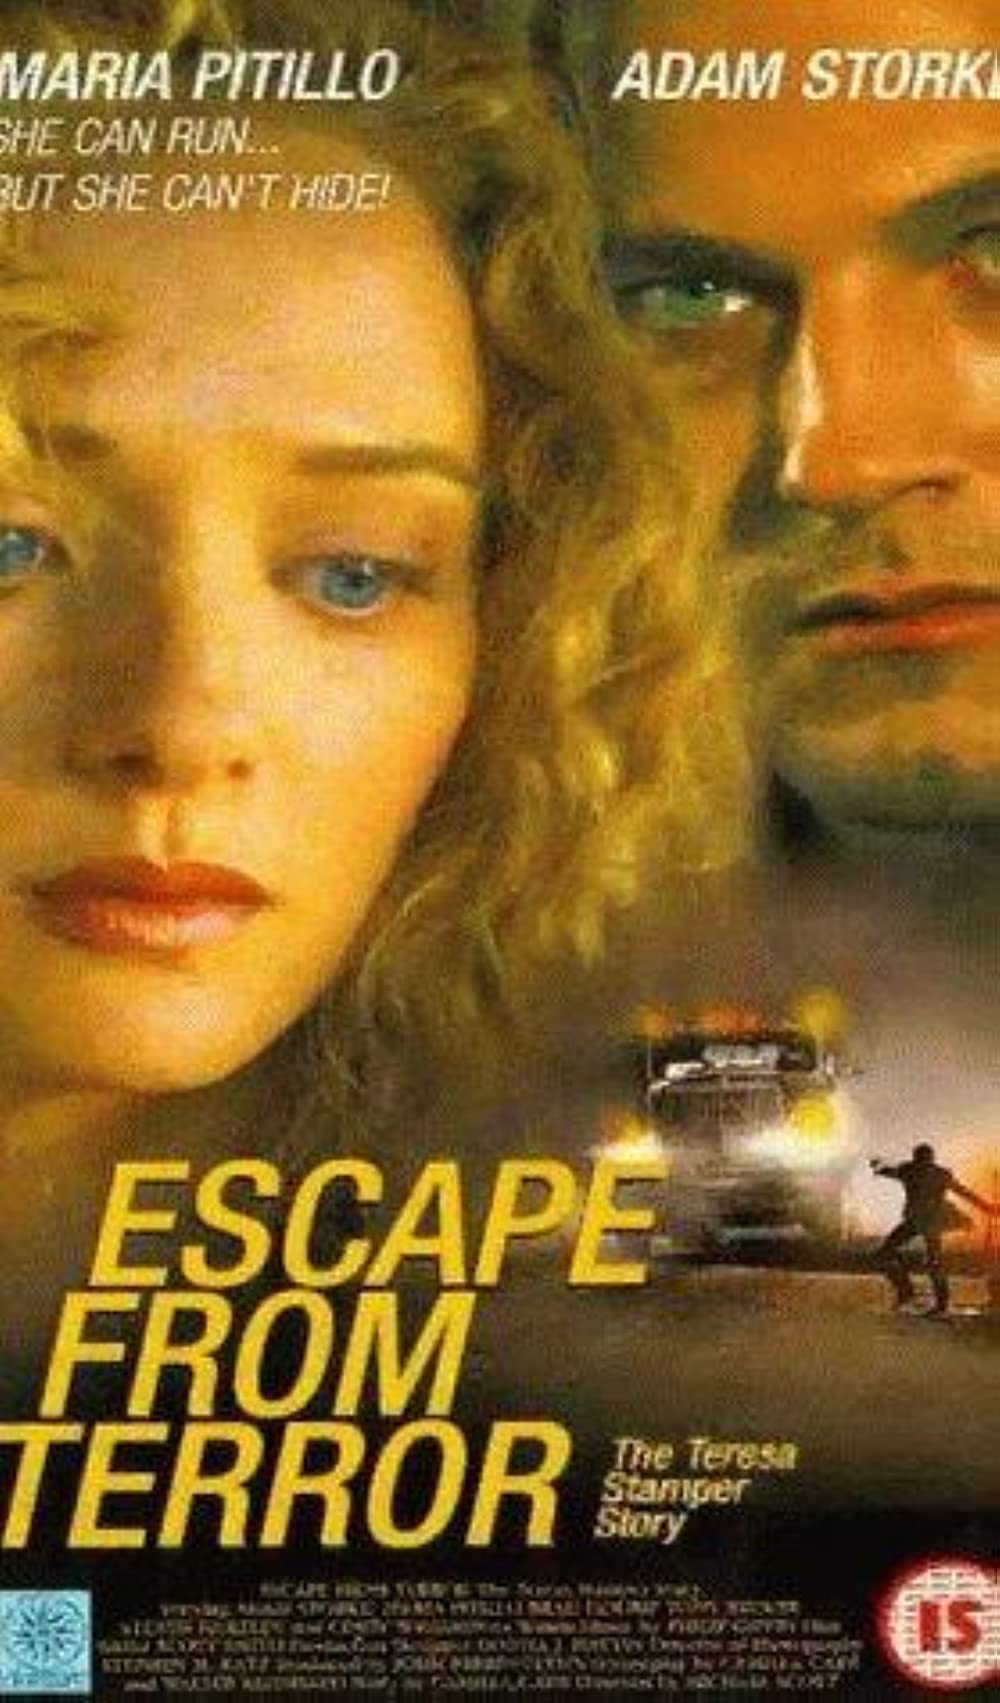 Escape from Terror The Teresa Stamper Story (1996 TV) Historical